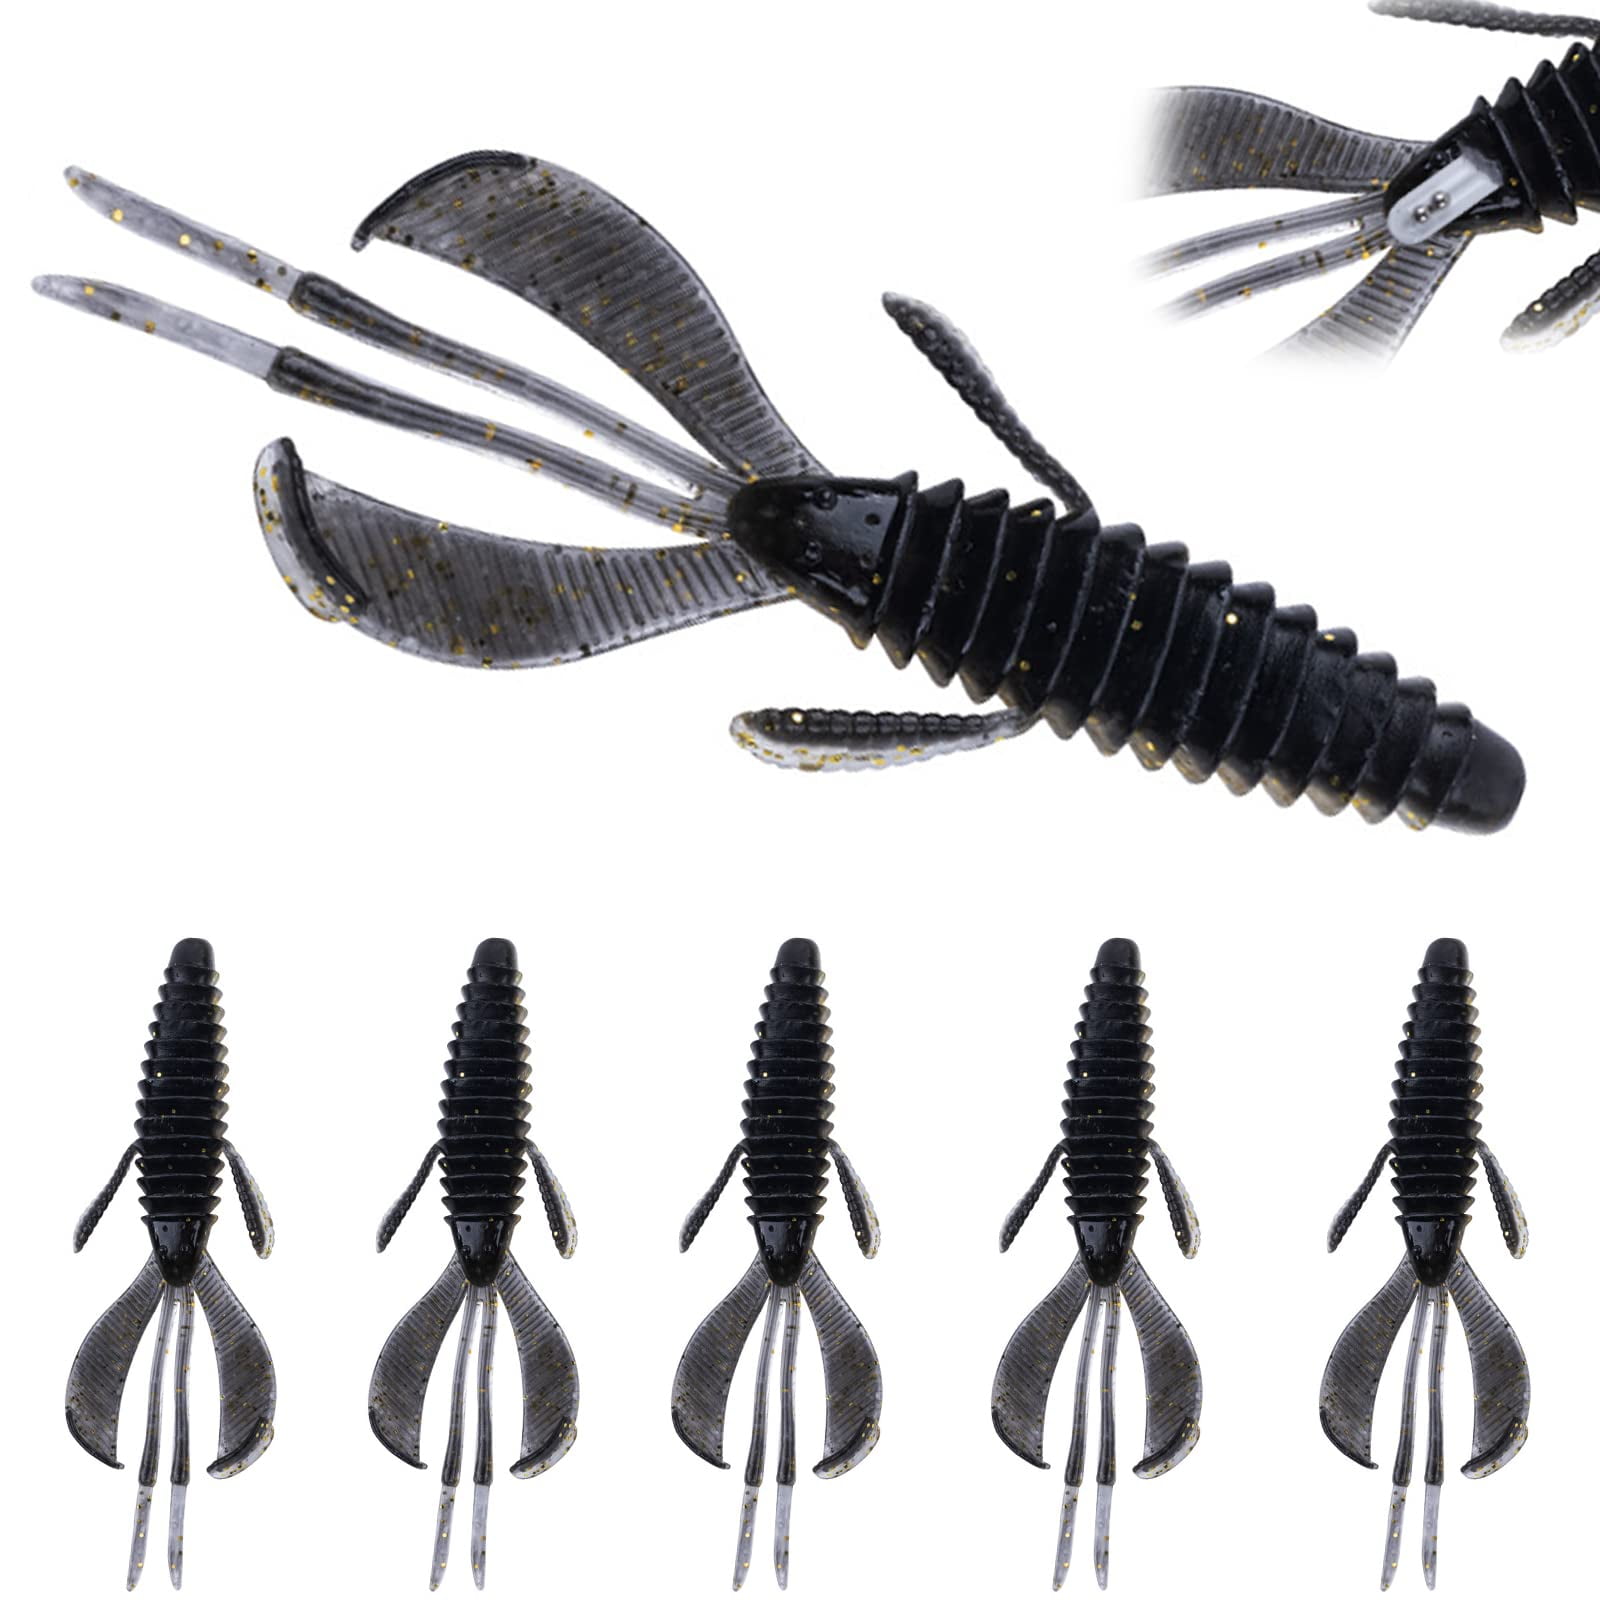 Goture Fishing Soft Plastic Lures Kit Jig Head Hooks Crappie Lures